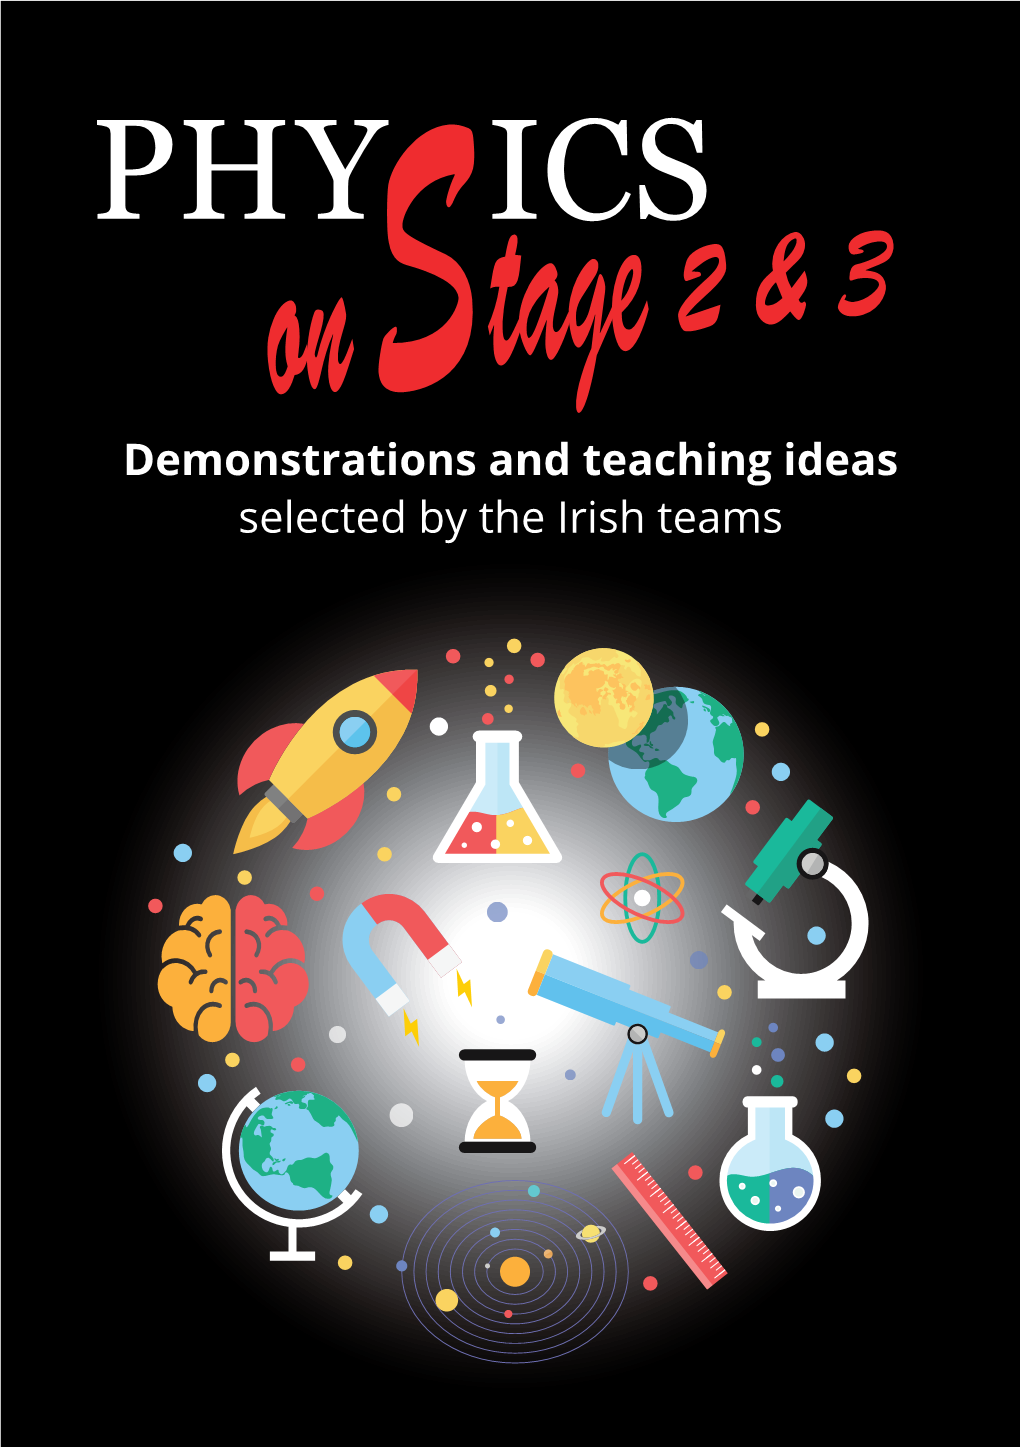 Physics on Stage 2&3 Teaching Ideas Selected by the Irish Teams